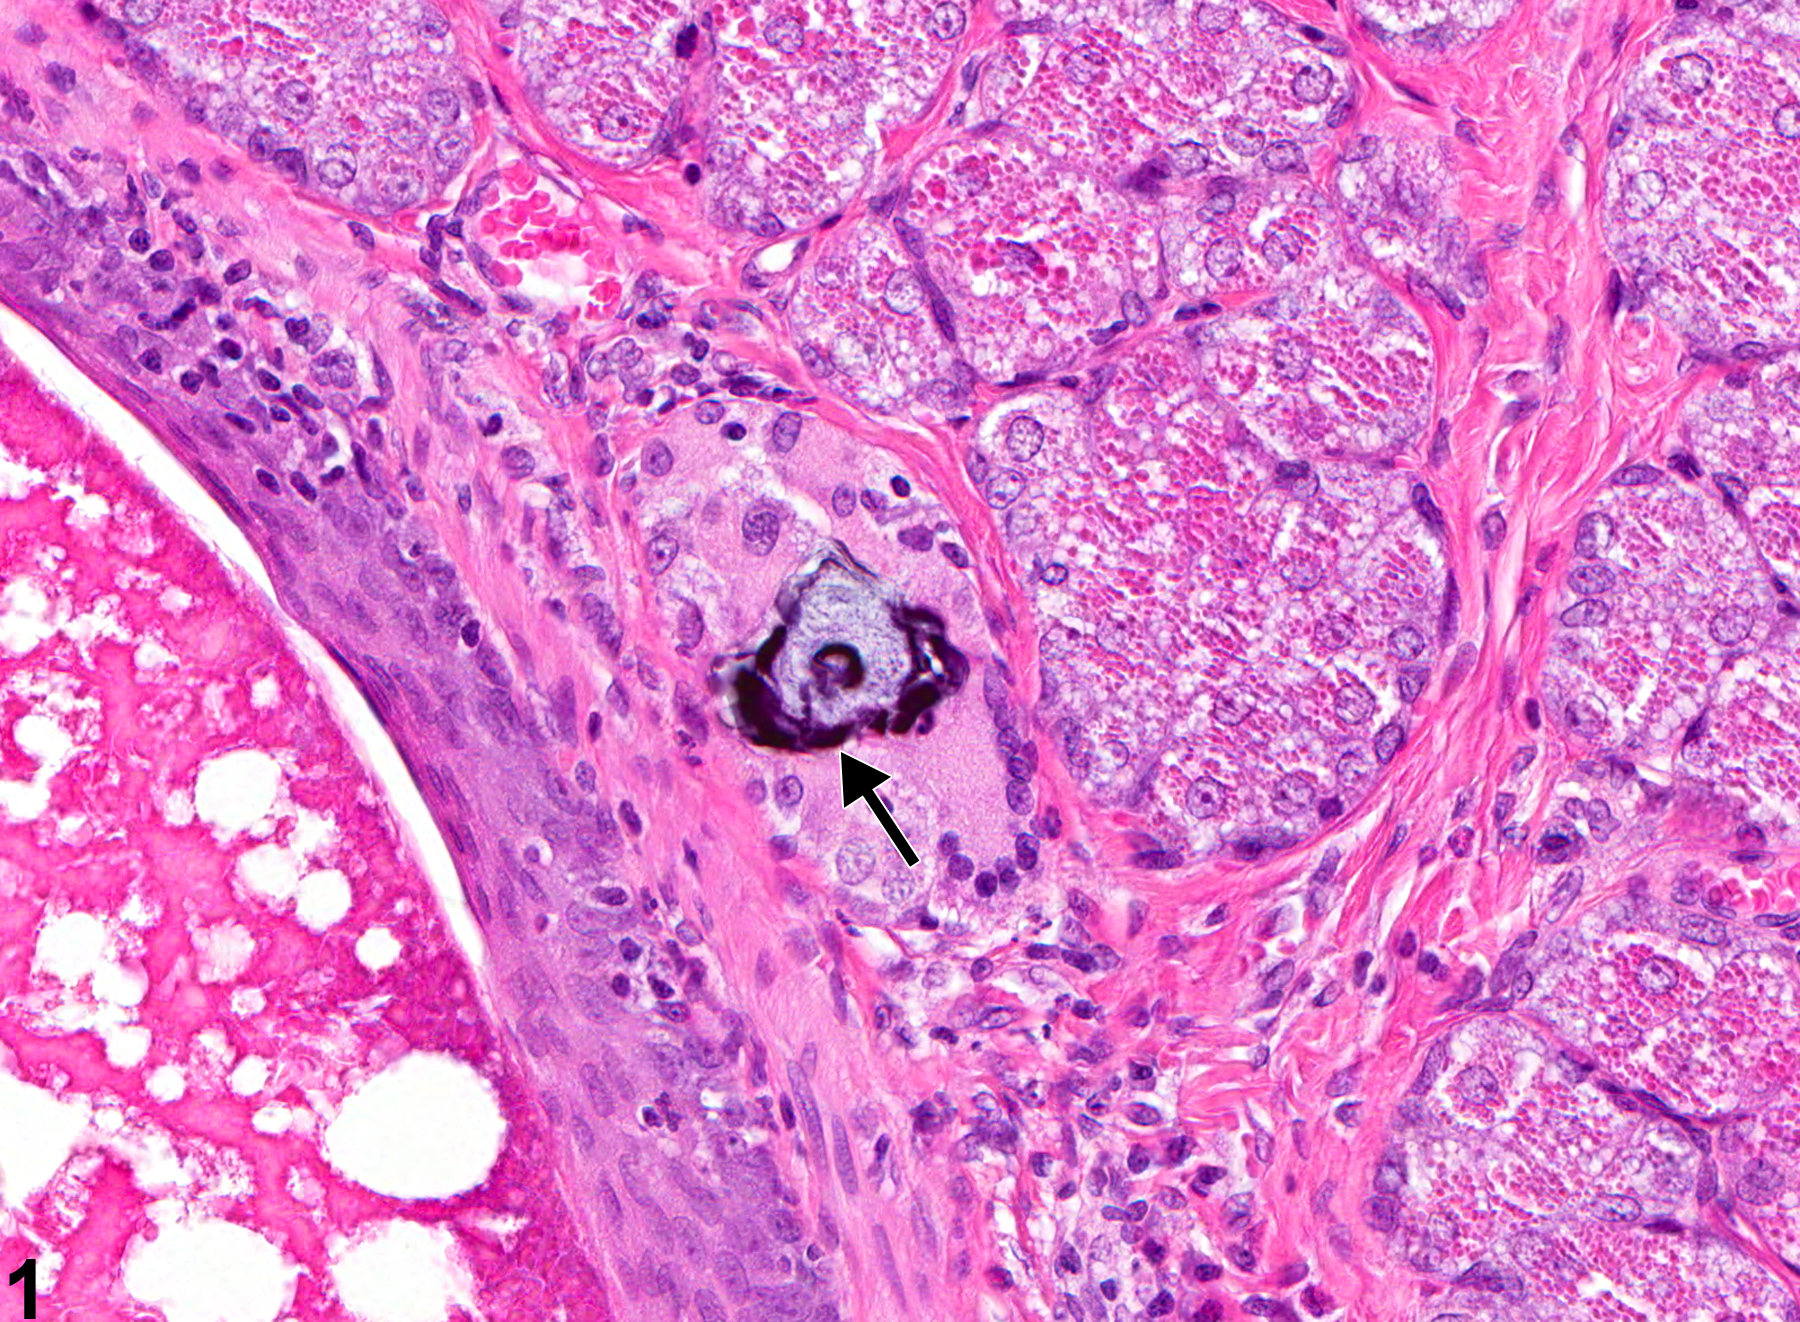 Image of mineralization in the preputial gland from a male F344/N rat in a subchronic study